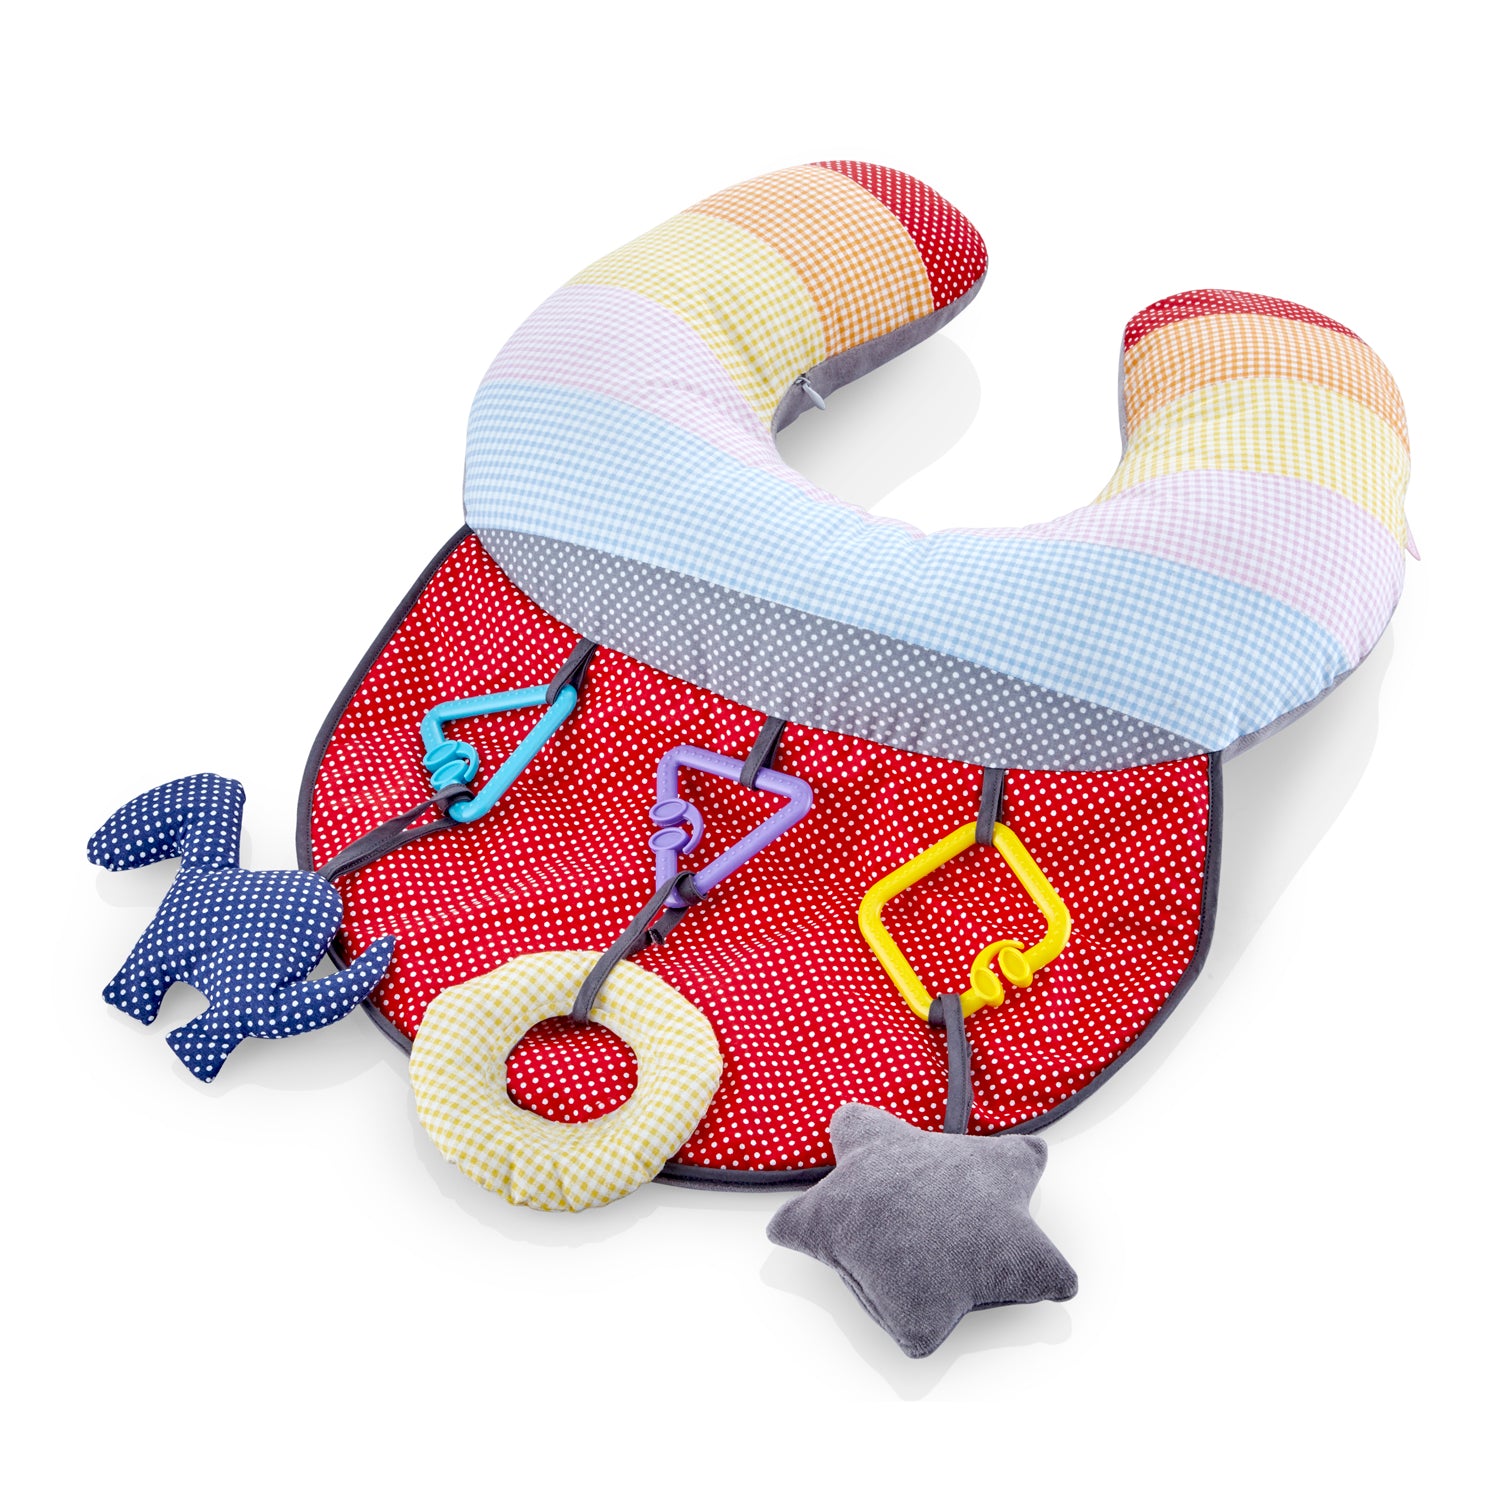 Exercise Pillow with Toys-Boy, catbabygear, catedu, cattoy18m+, catveh, Colors, Exercise, Girl, Lay, Laying, Newborn, Pillow, Play, Safe, Sensory, Shapes, Sleeping, Soft, Toys, Tummy, Unisex-Babyjem-[Too Twee]-[Tootwee]-[baby]-[newborn]-[clothes]-[essentials]-[toys]-[Lebanon]